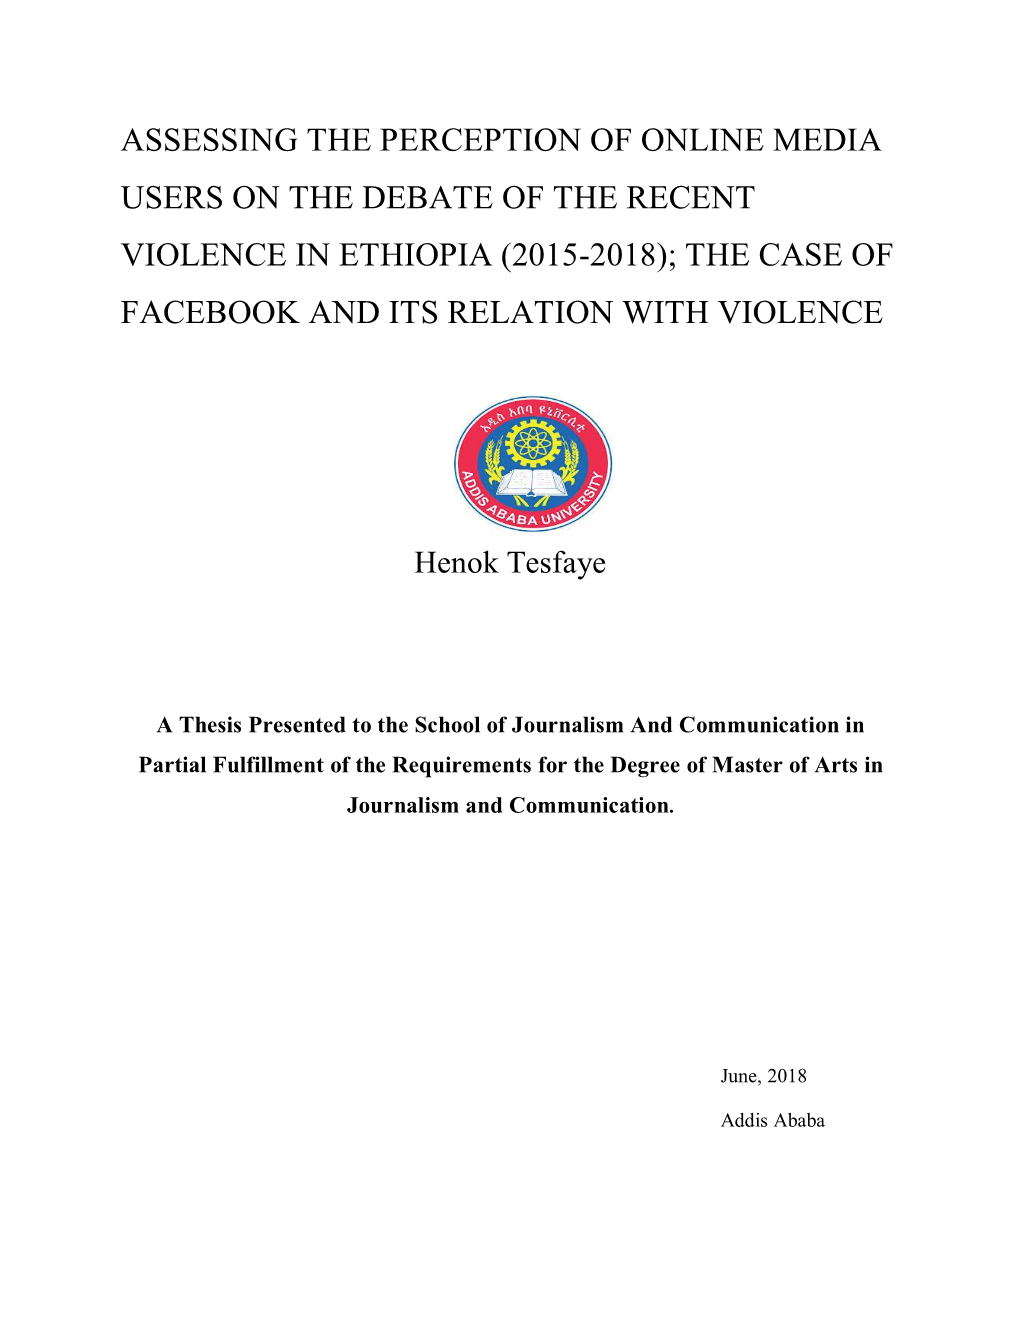 Assessing the Perception of Online Media Users on the Debate of the Recent Violence in Ethiopia (2015-2018); the Case of Facebook and Its Relation with Violence